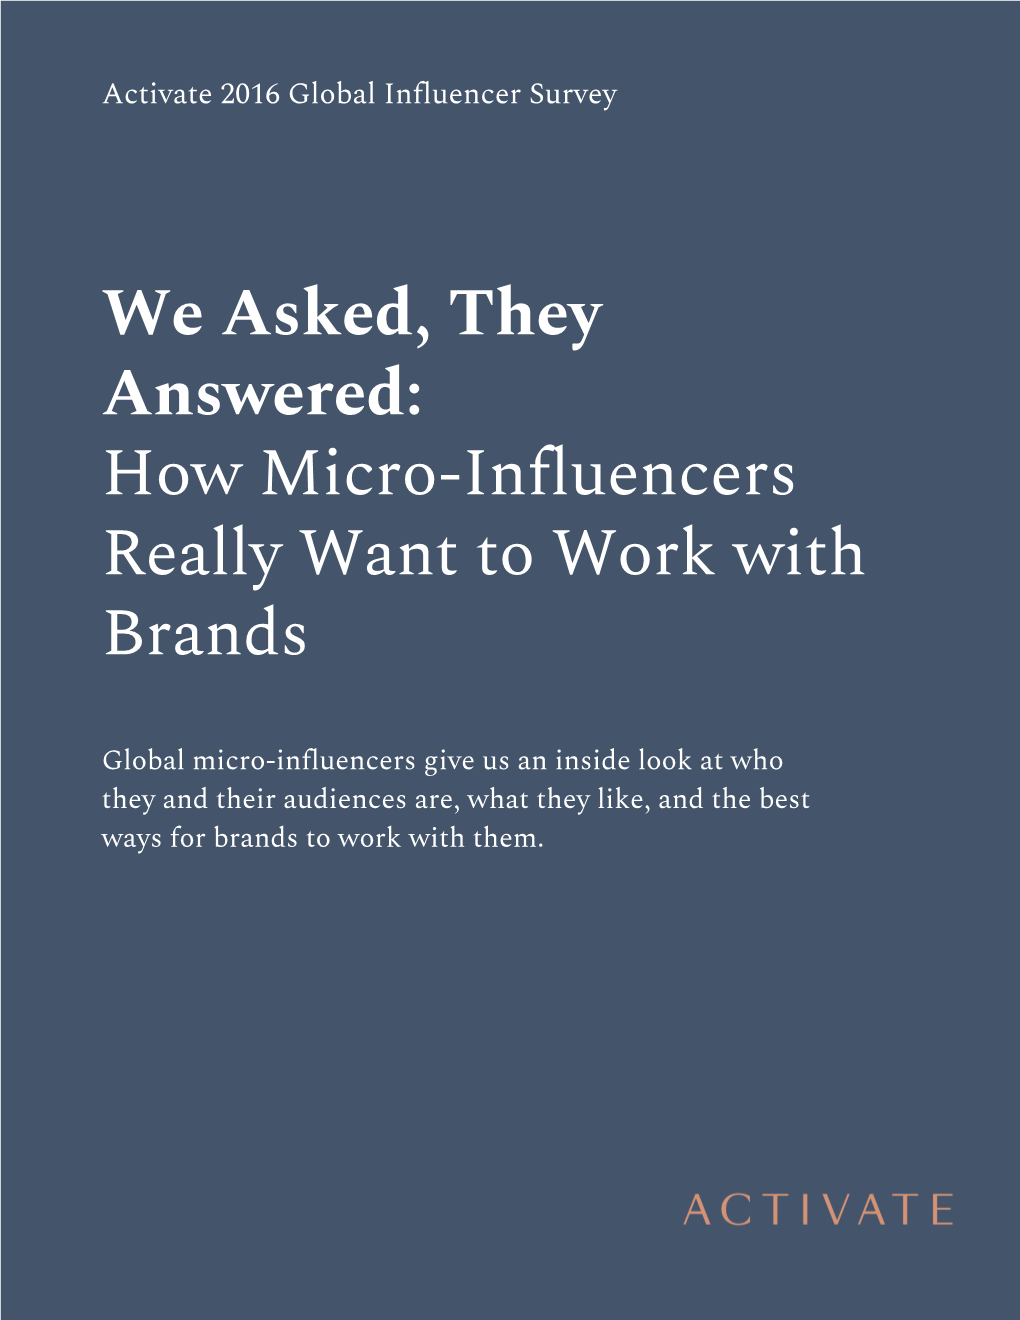 We Asked, They Answered: How Micro-Influencers Really Want to Work with Brands